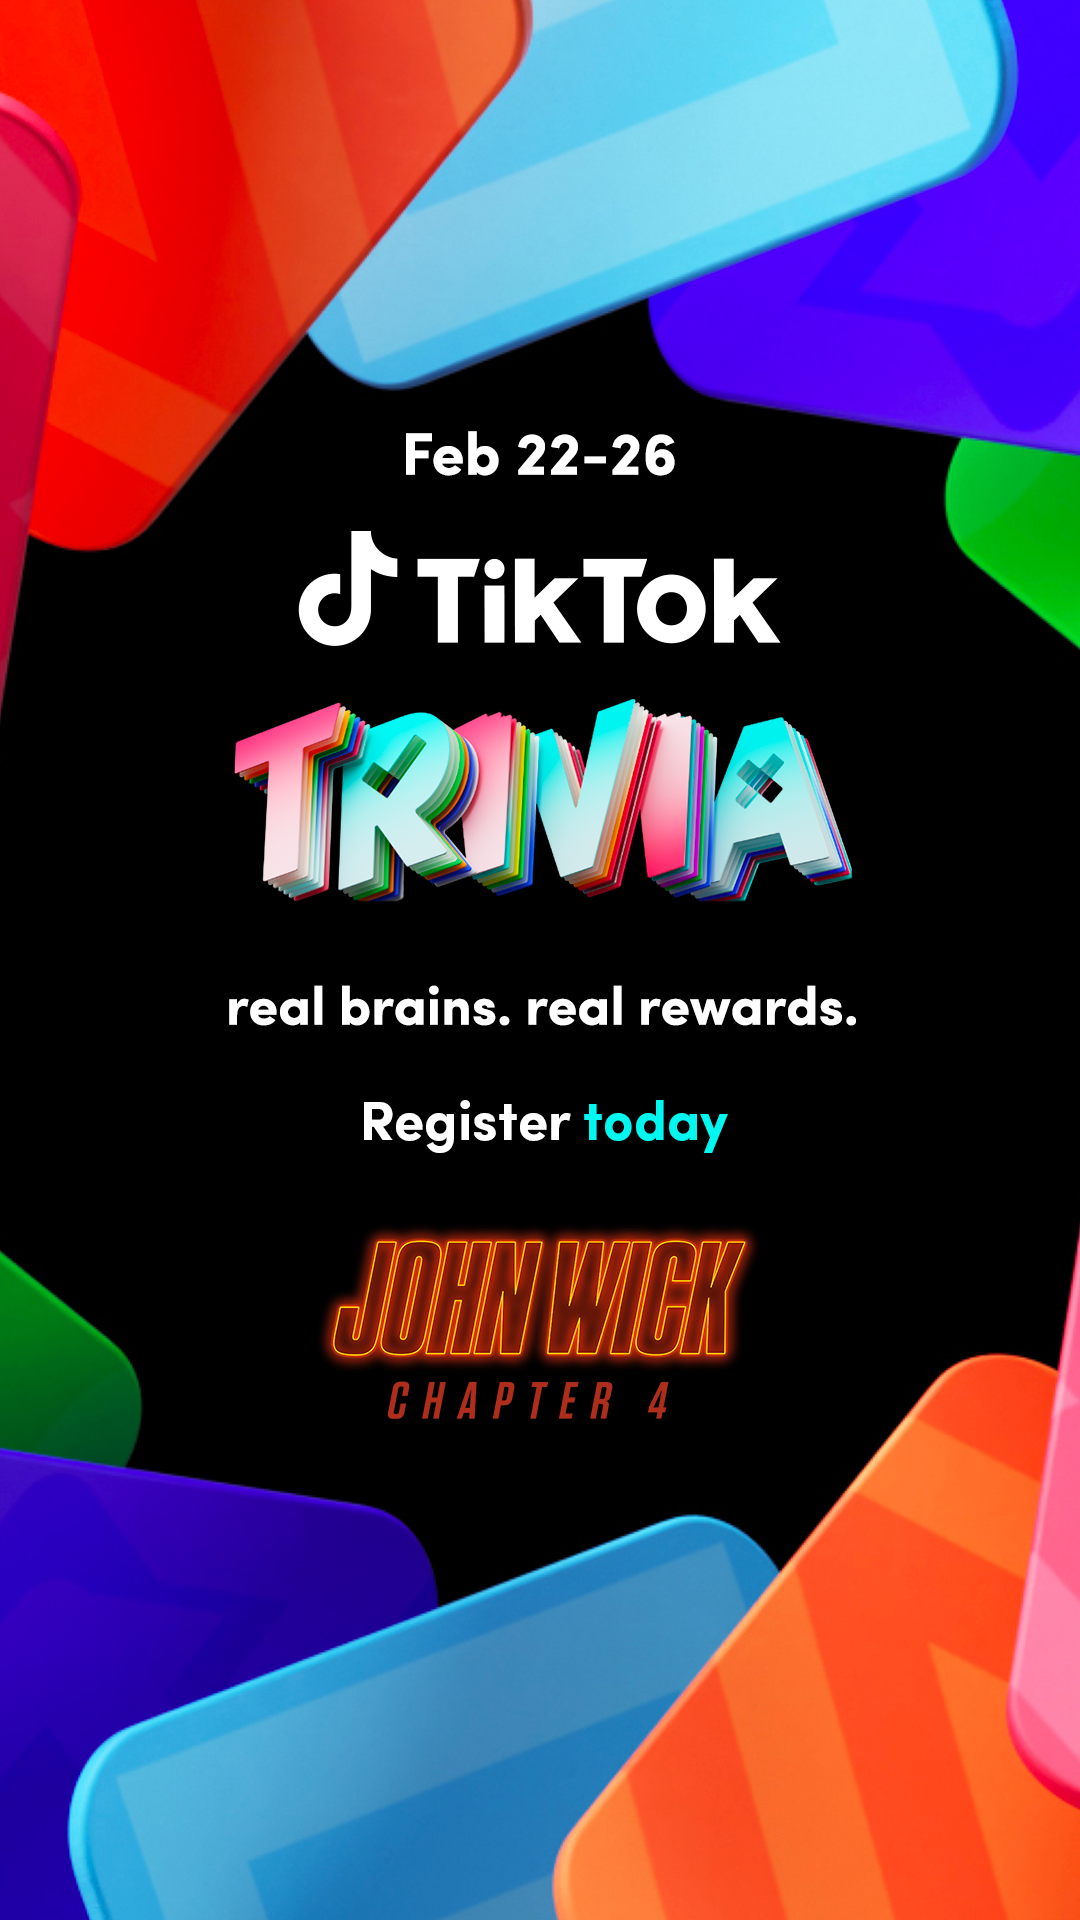 Join me on Wed 2/22 as part of the TikTok Trivia campaign for the chan